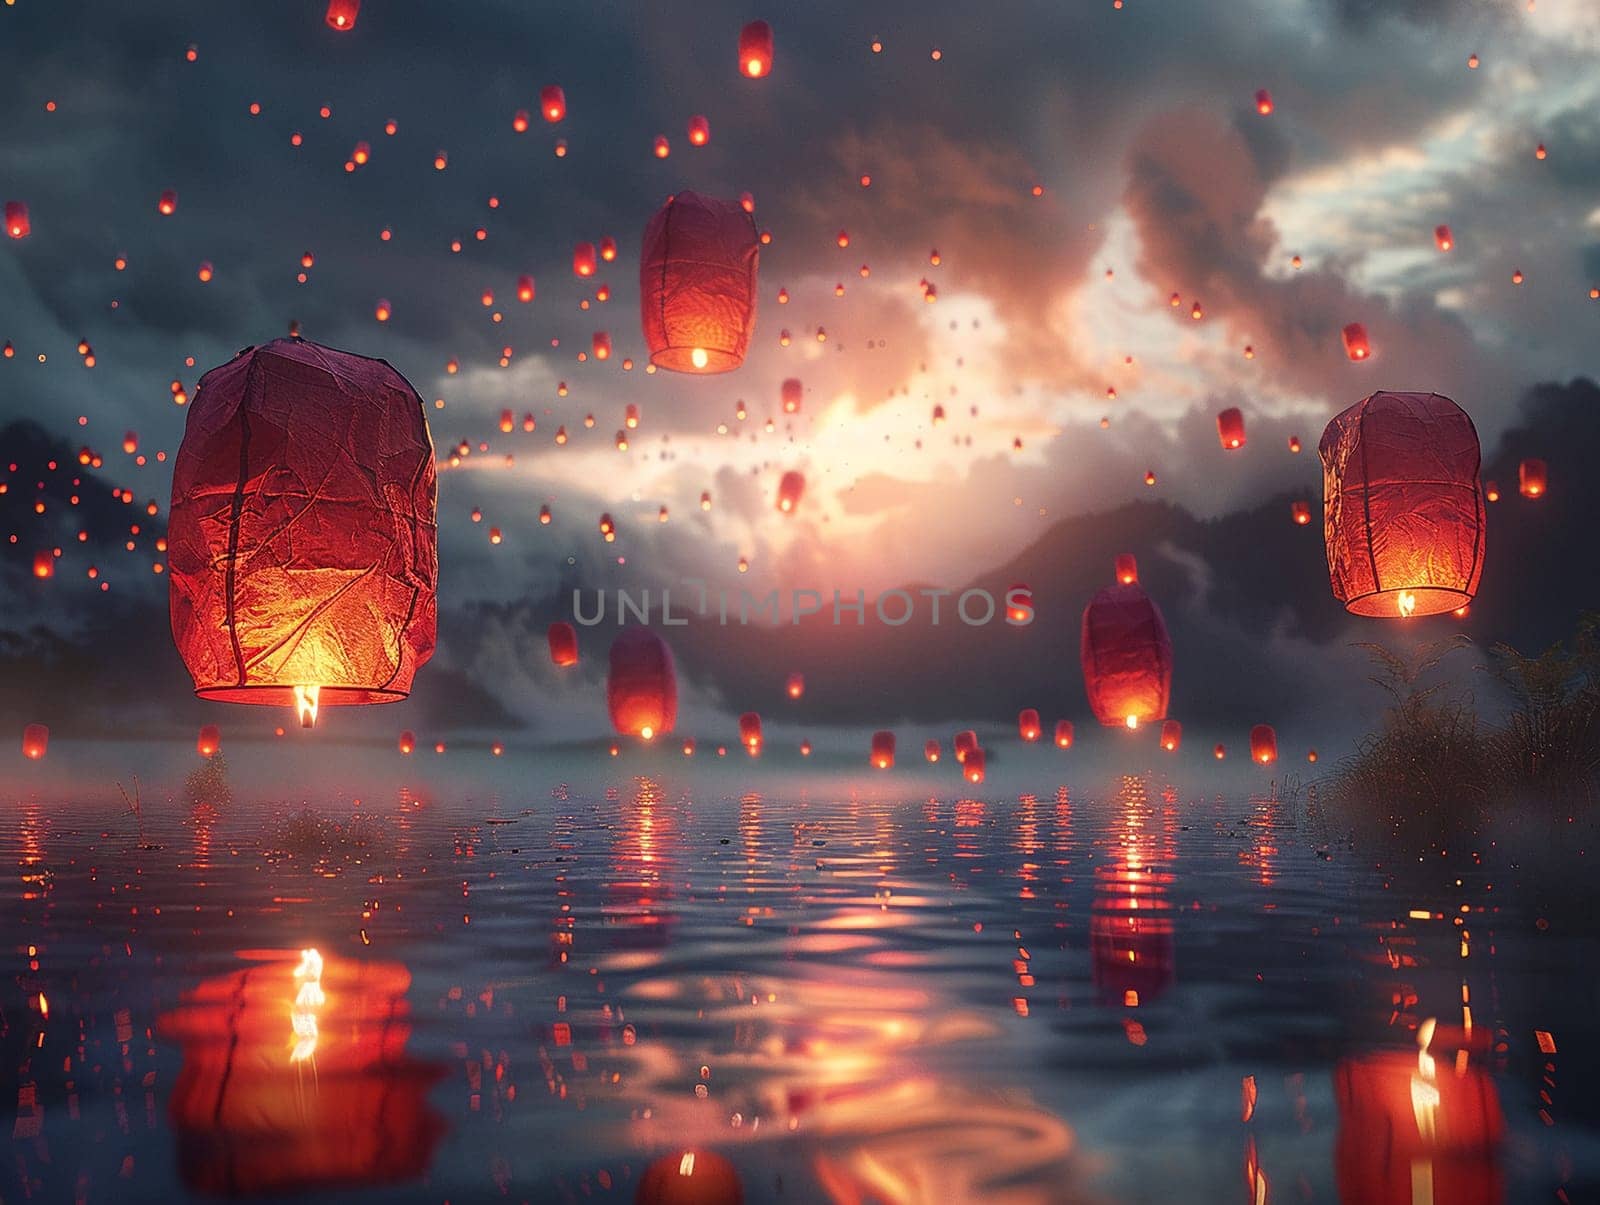 Glowing Lanterns Released into a Twilight Sky, The light blurs upward, hopes and wishes rising into the evening.